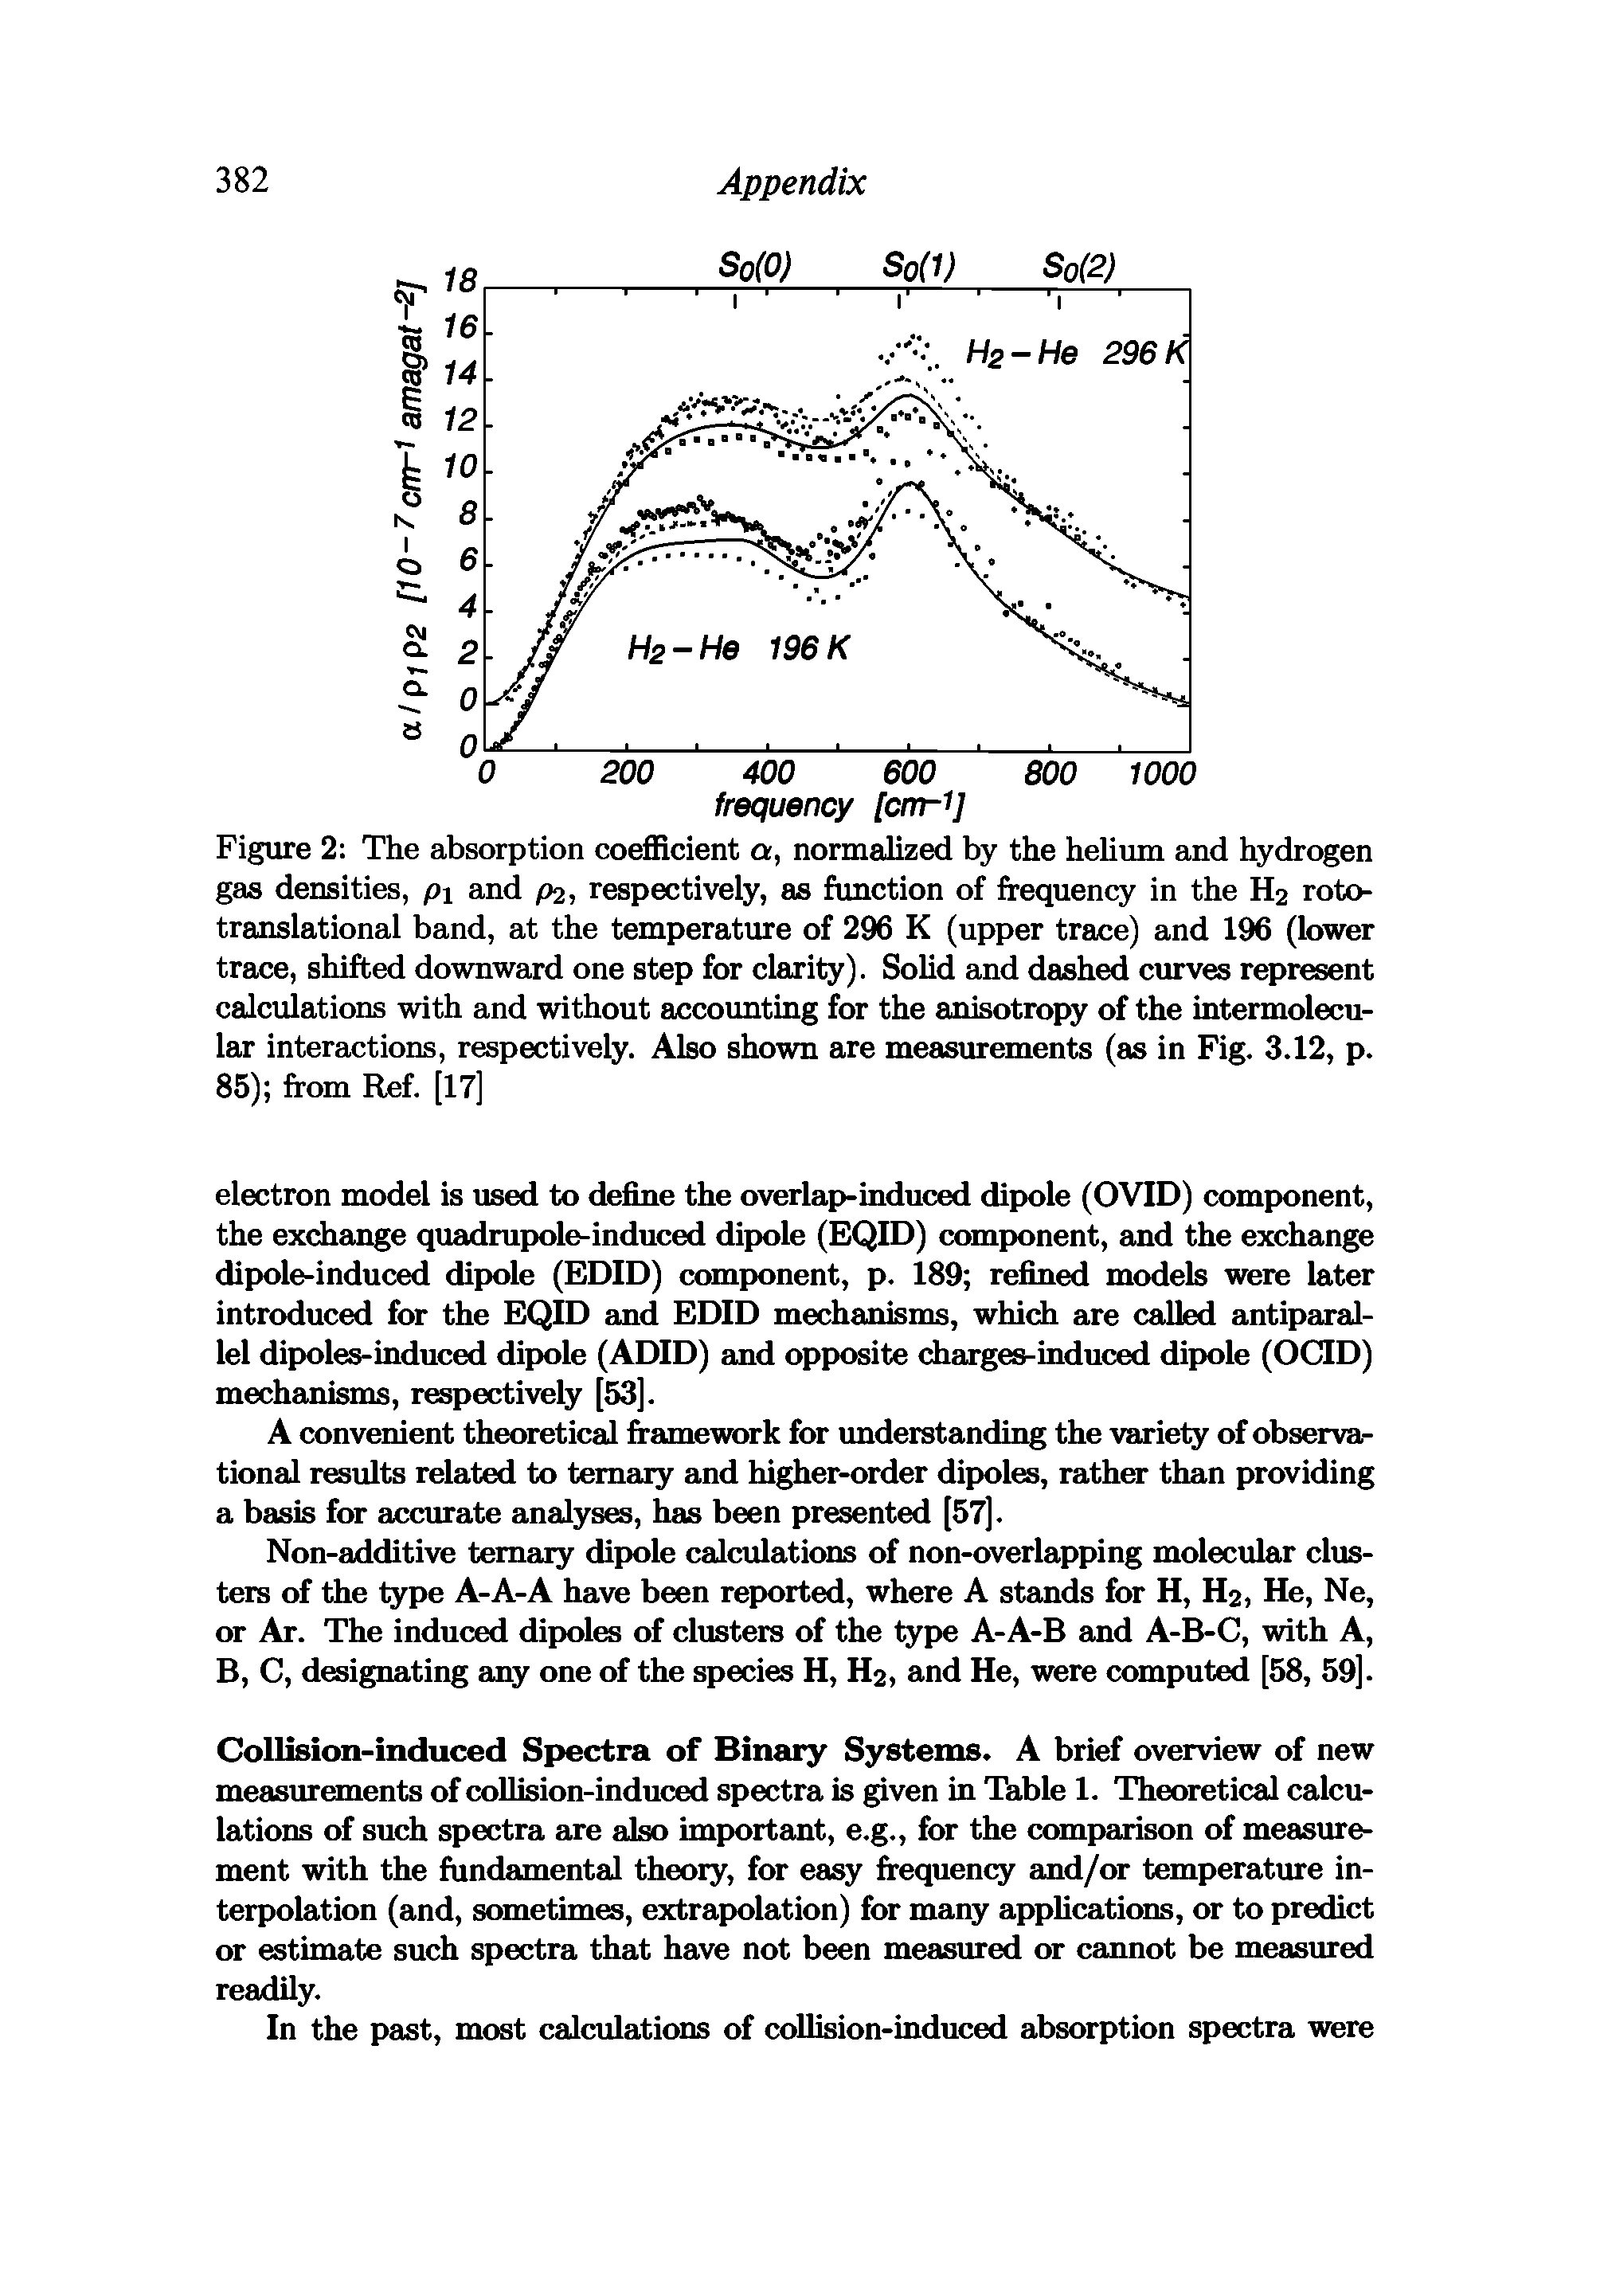 Figure 2 The absorption coefficient a, normalized by the helium and hydrogen gas densities, pi and P2, respectively, as function of frequency in the H2 roto-translational band, at the temperature of 296 K (upper trace) and 196 (lower trace, shifted downward one step for clarity). Solid and dashed curves represent calculations with and without accounting for the anisotropy of the intermolecu-lar interactions, respectively. Also shown are measurements (as in Fig. 3.12, p. 85) from Ref. [17]...